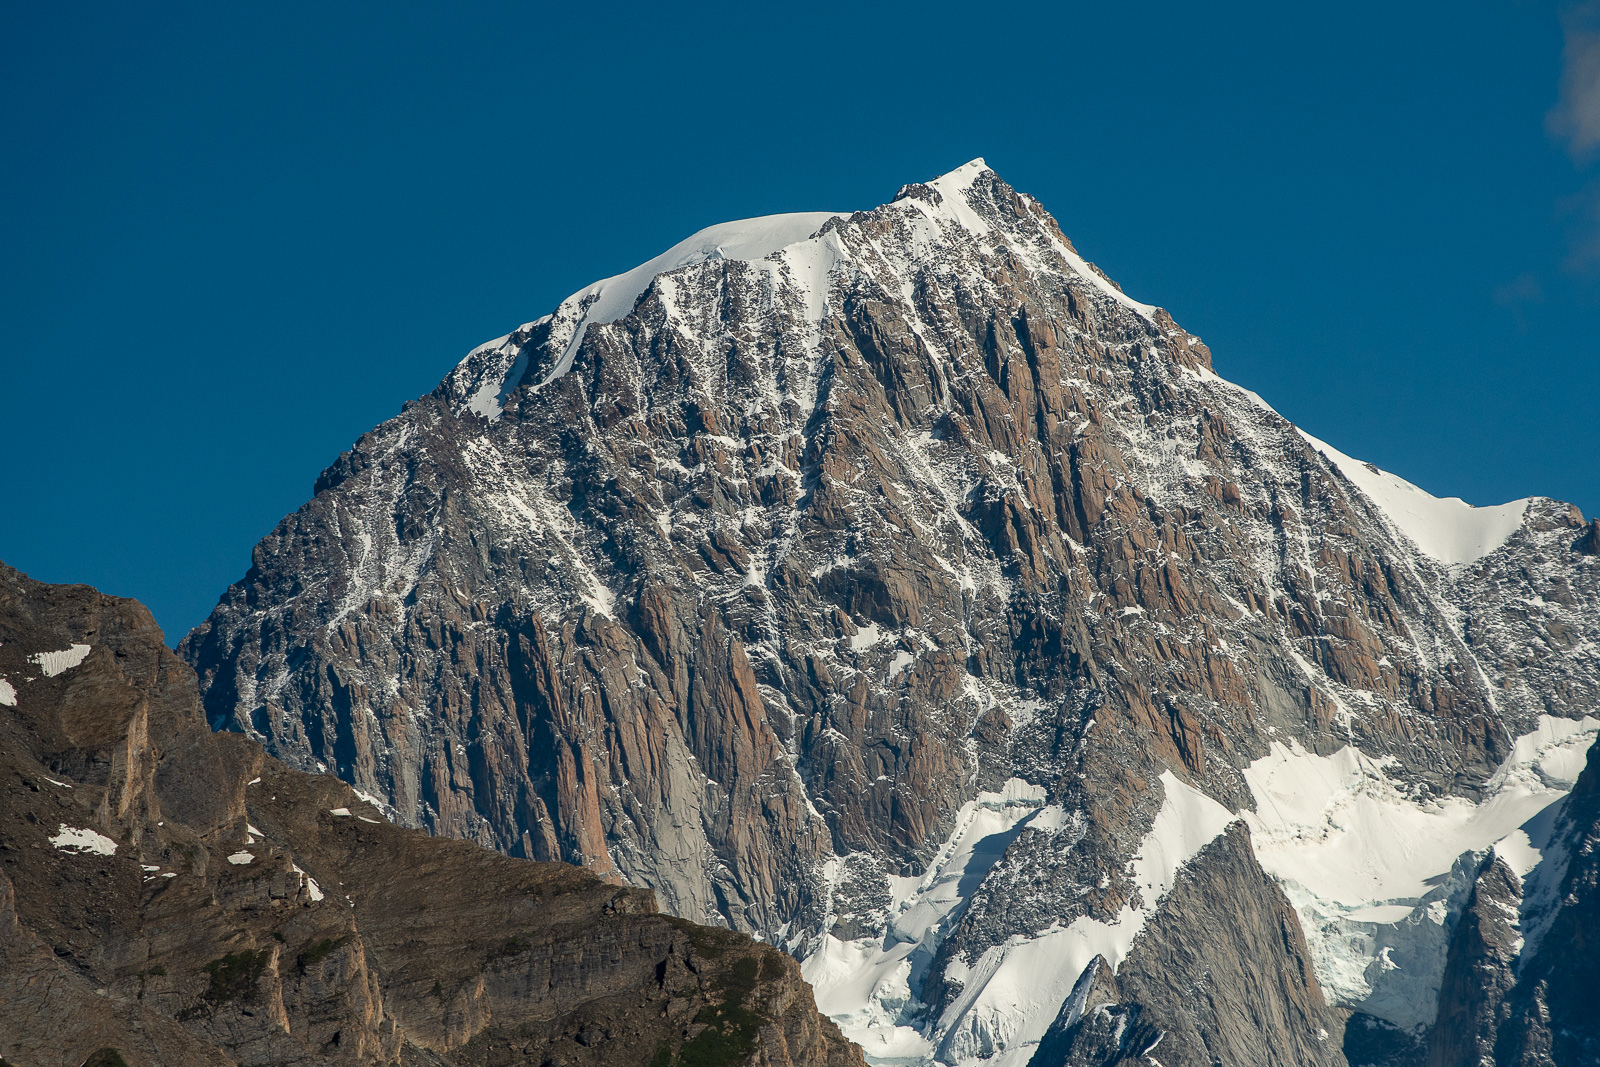 Mont Blanc is one stunning giant